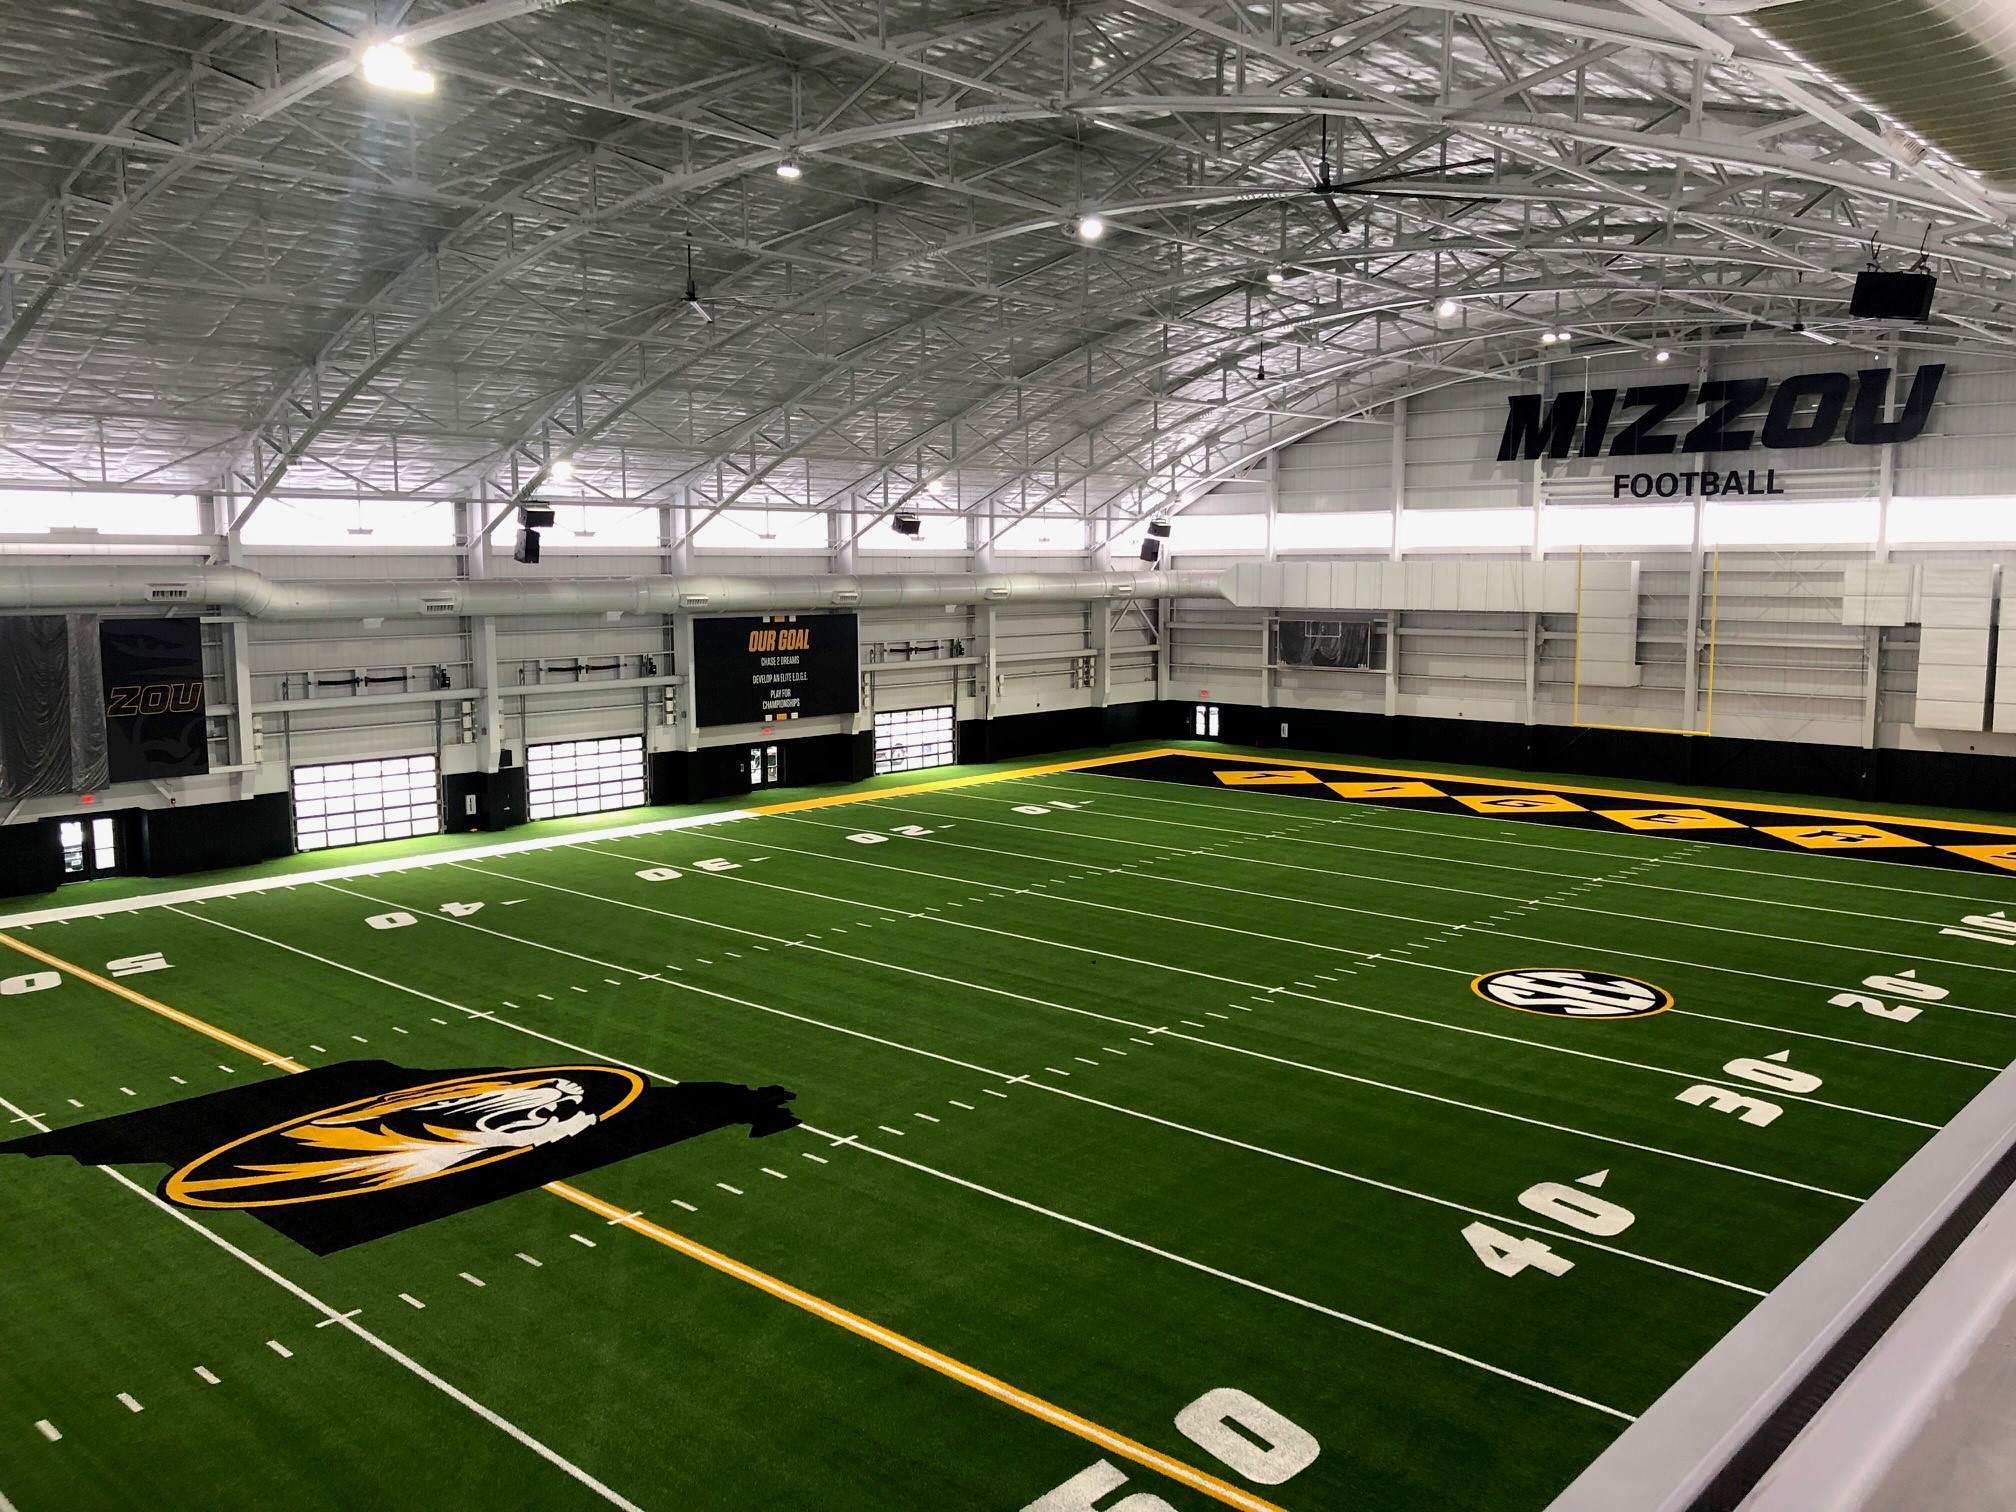 AstroTurf Announces Installation of Advanced 3D3-60 AstroTurf Field System at Mizzou's Football Practice Facility